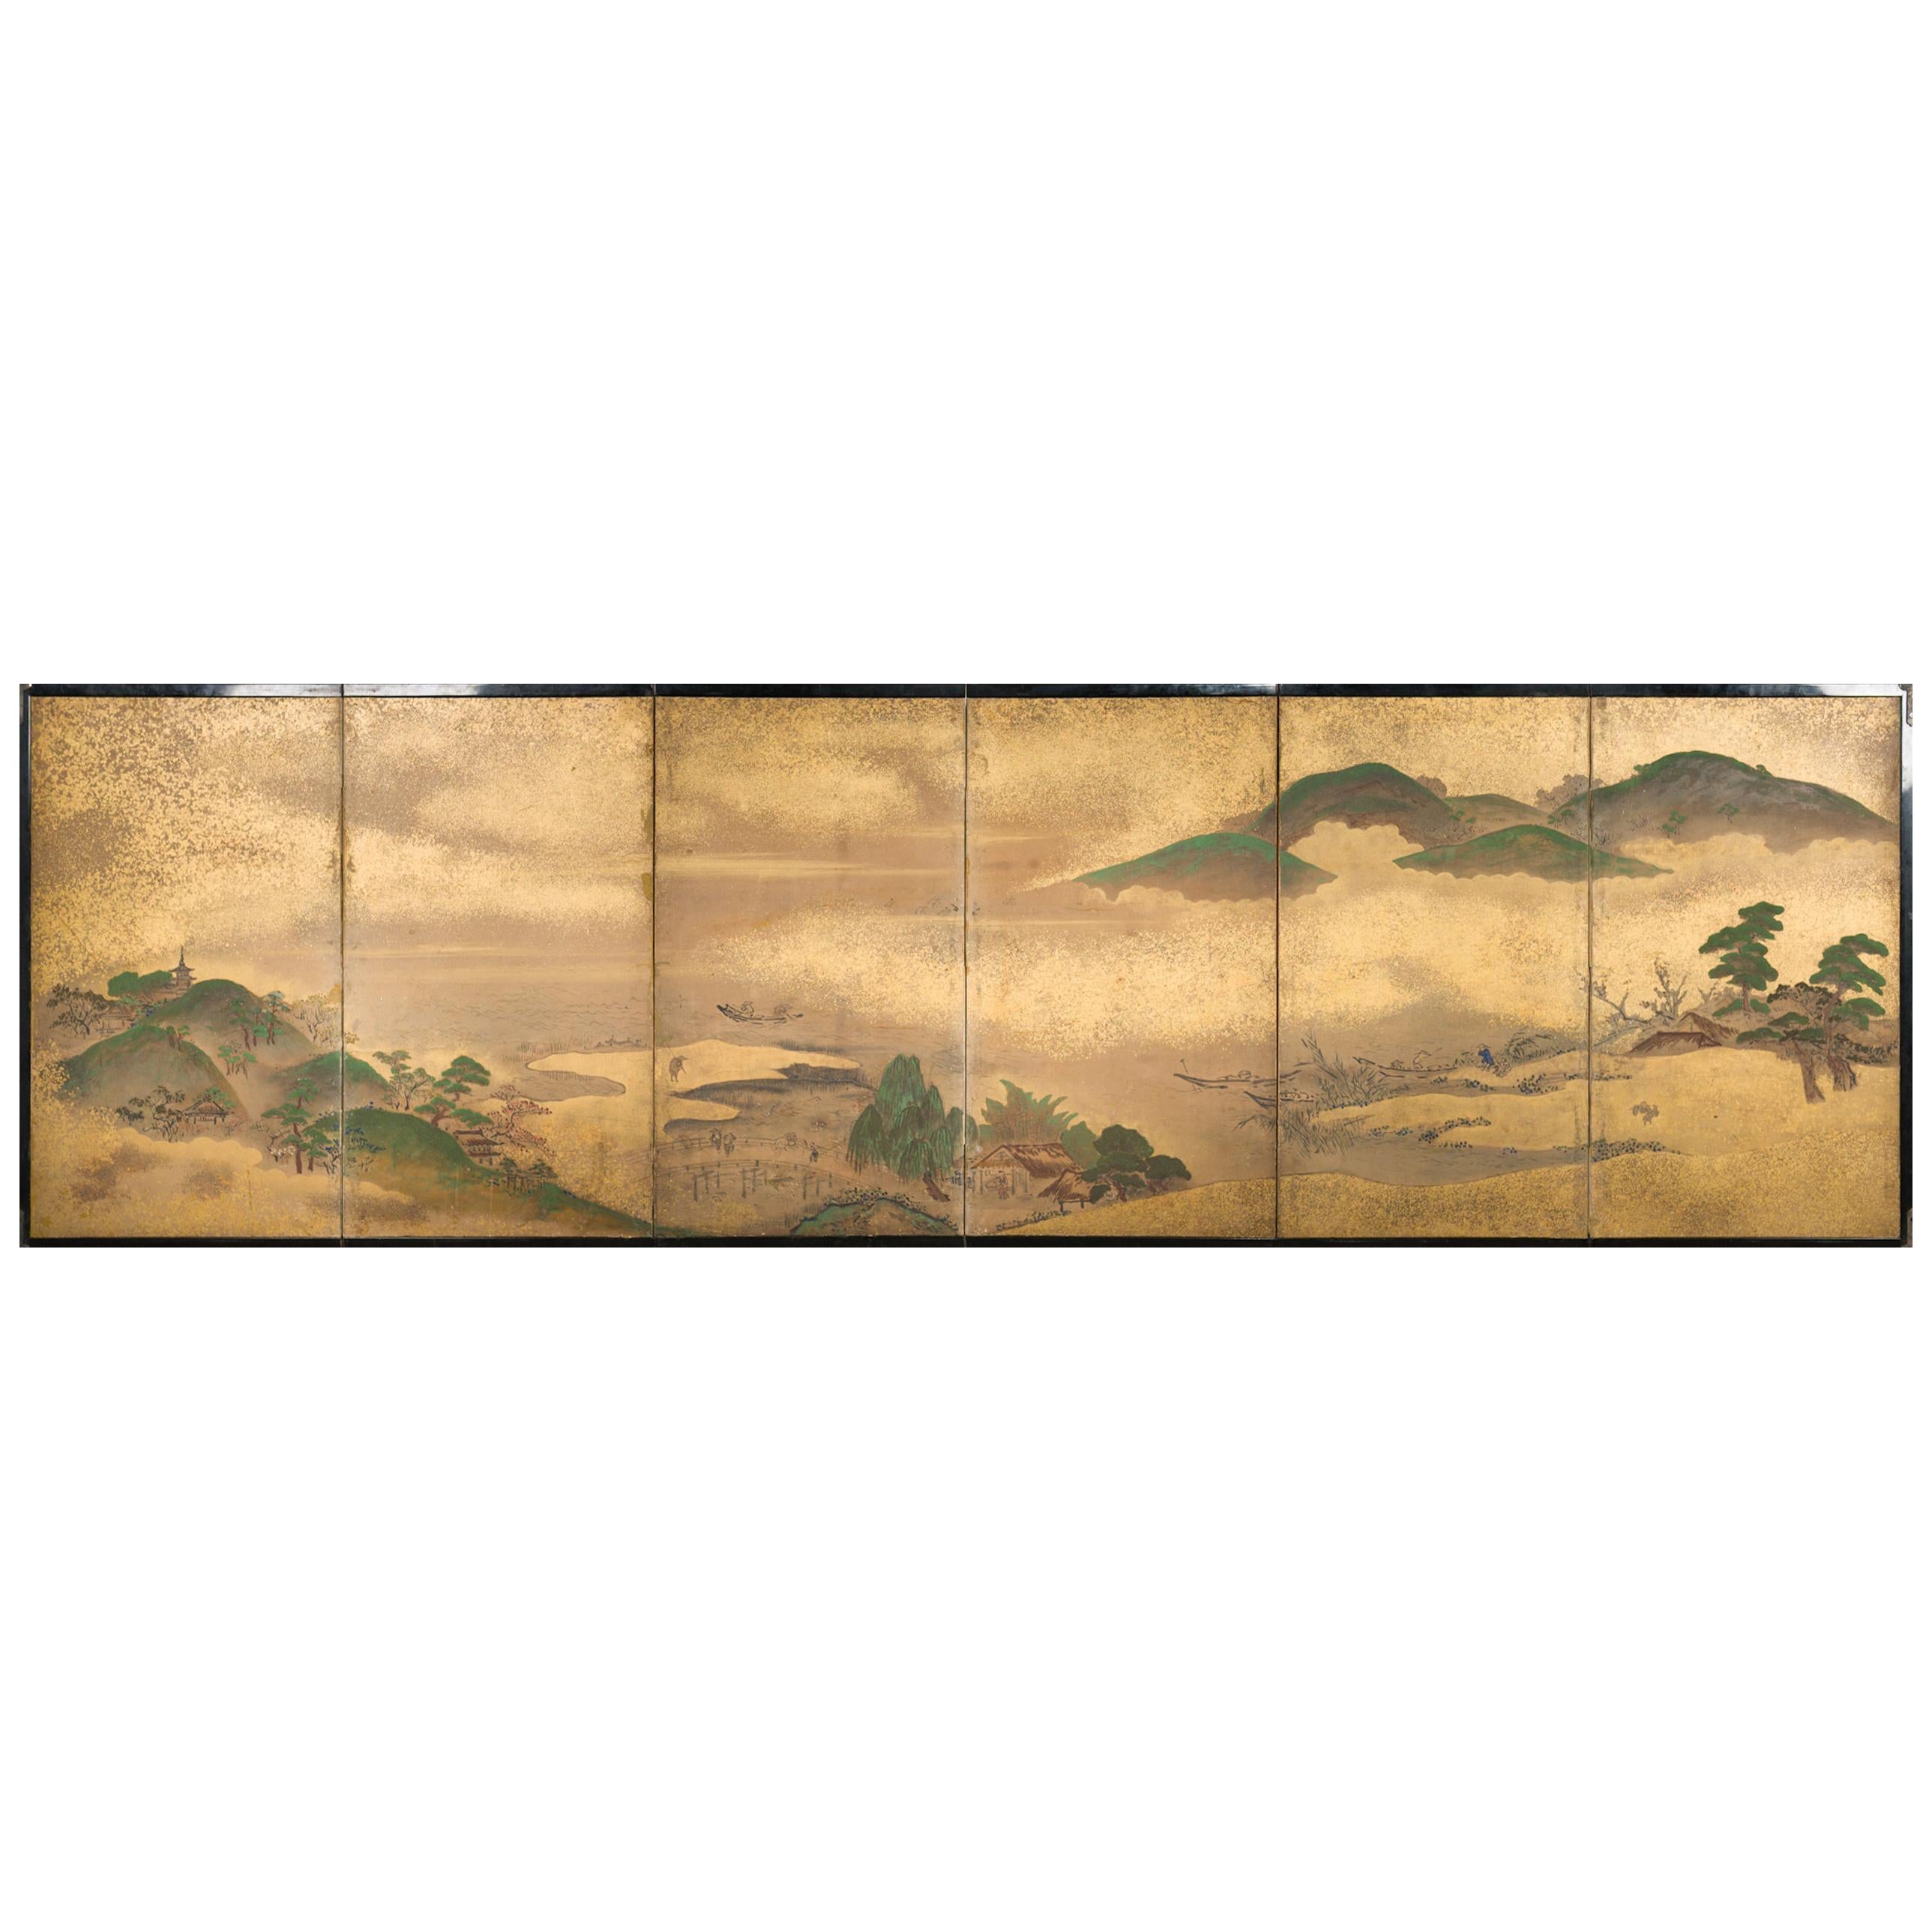 Japanese Six Panel Screen: Rolling Country Landscape